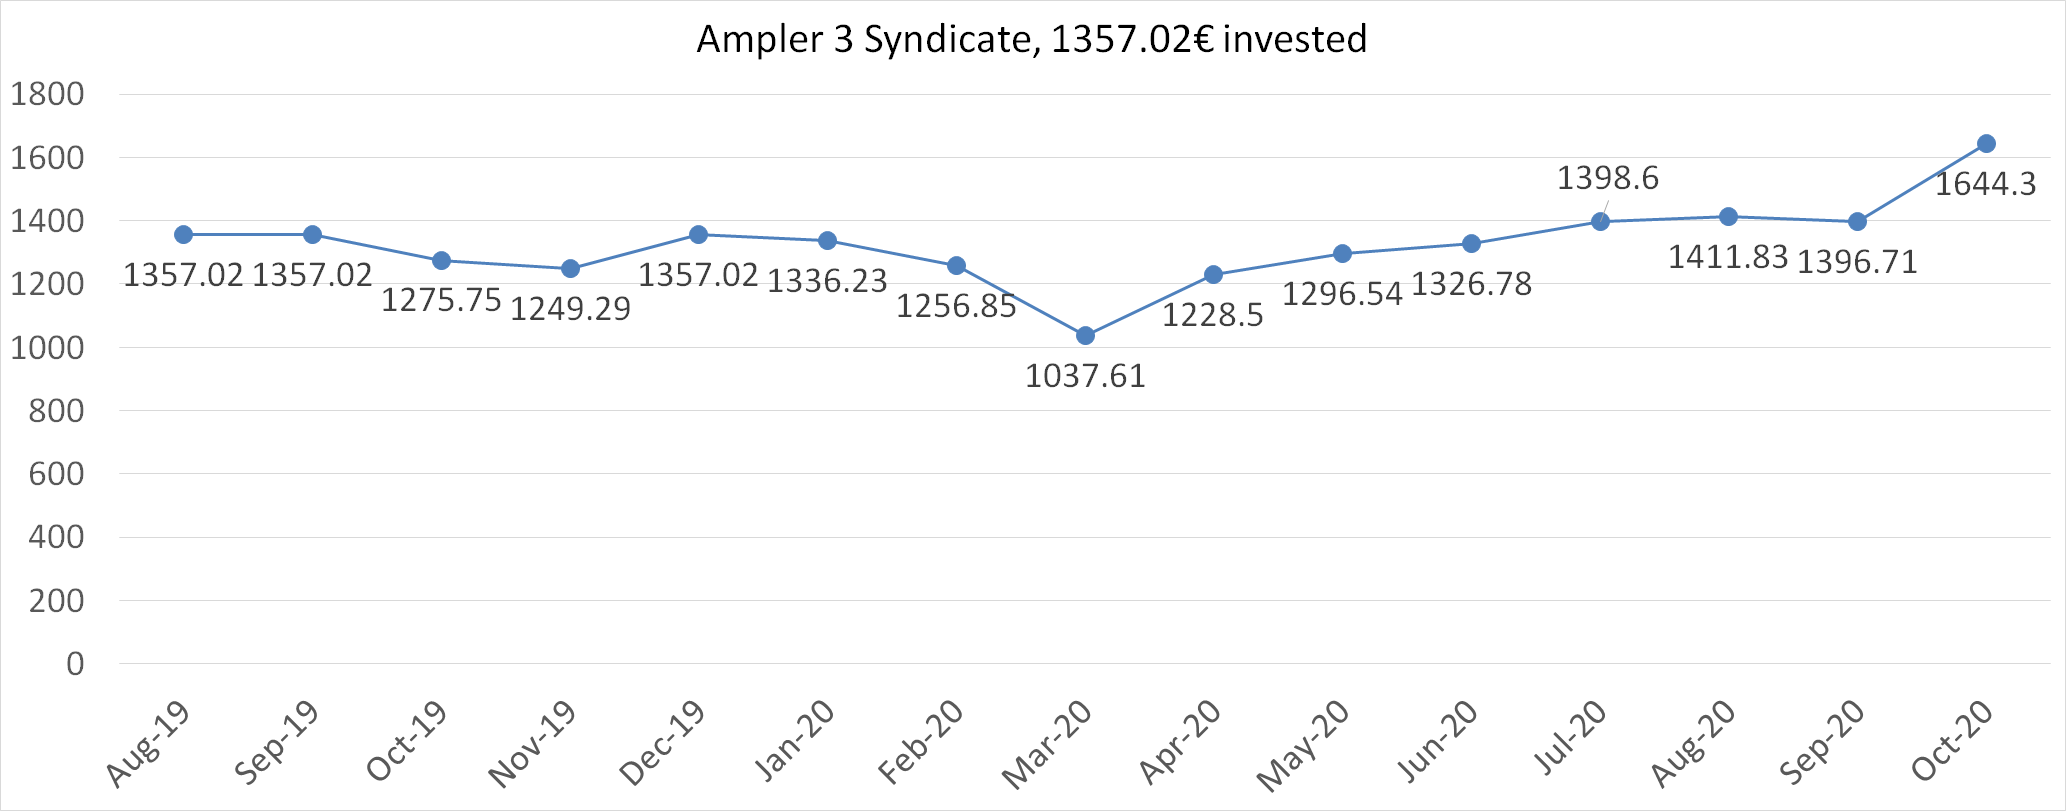 Ampler 3 syndicate october 2020